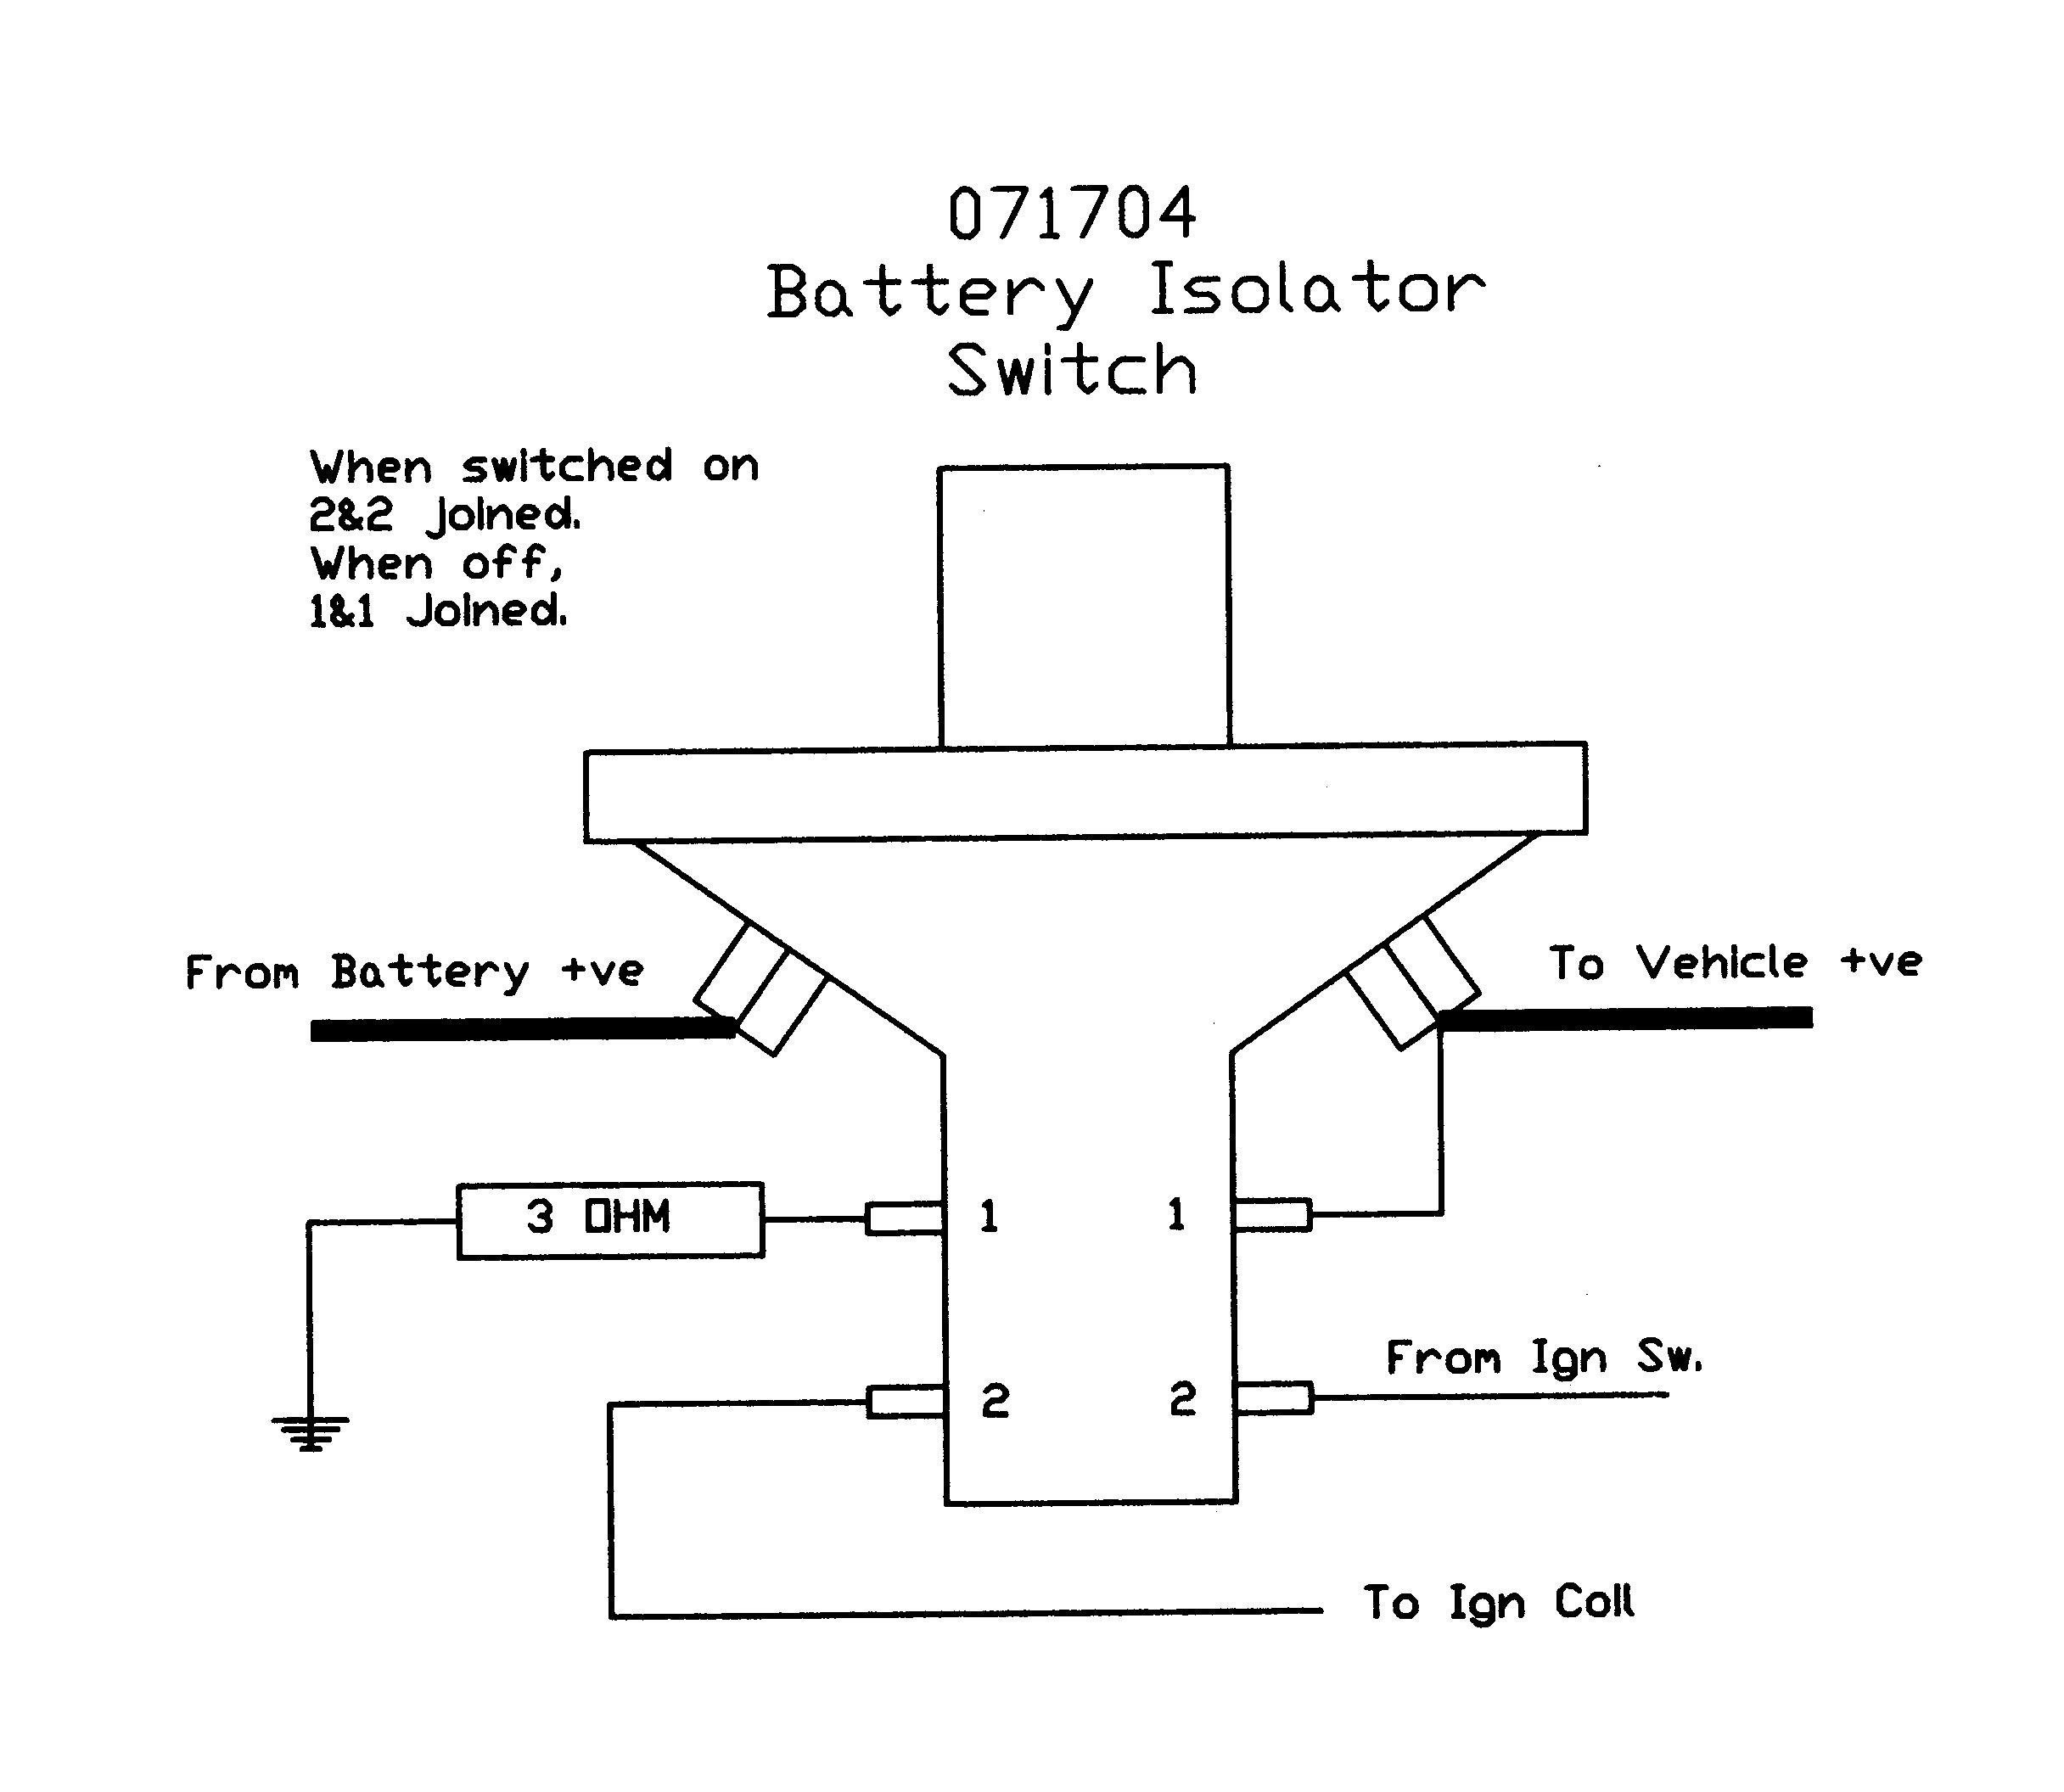 Wiring Diagram for Battery isolator Switch Best Wiring Diagram for A Guitar Kill Switch Refrence Battery